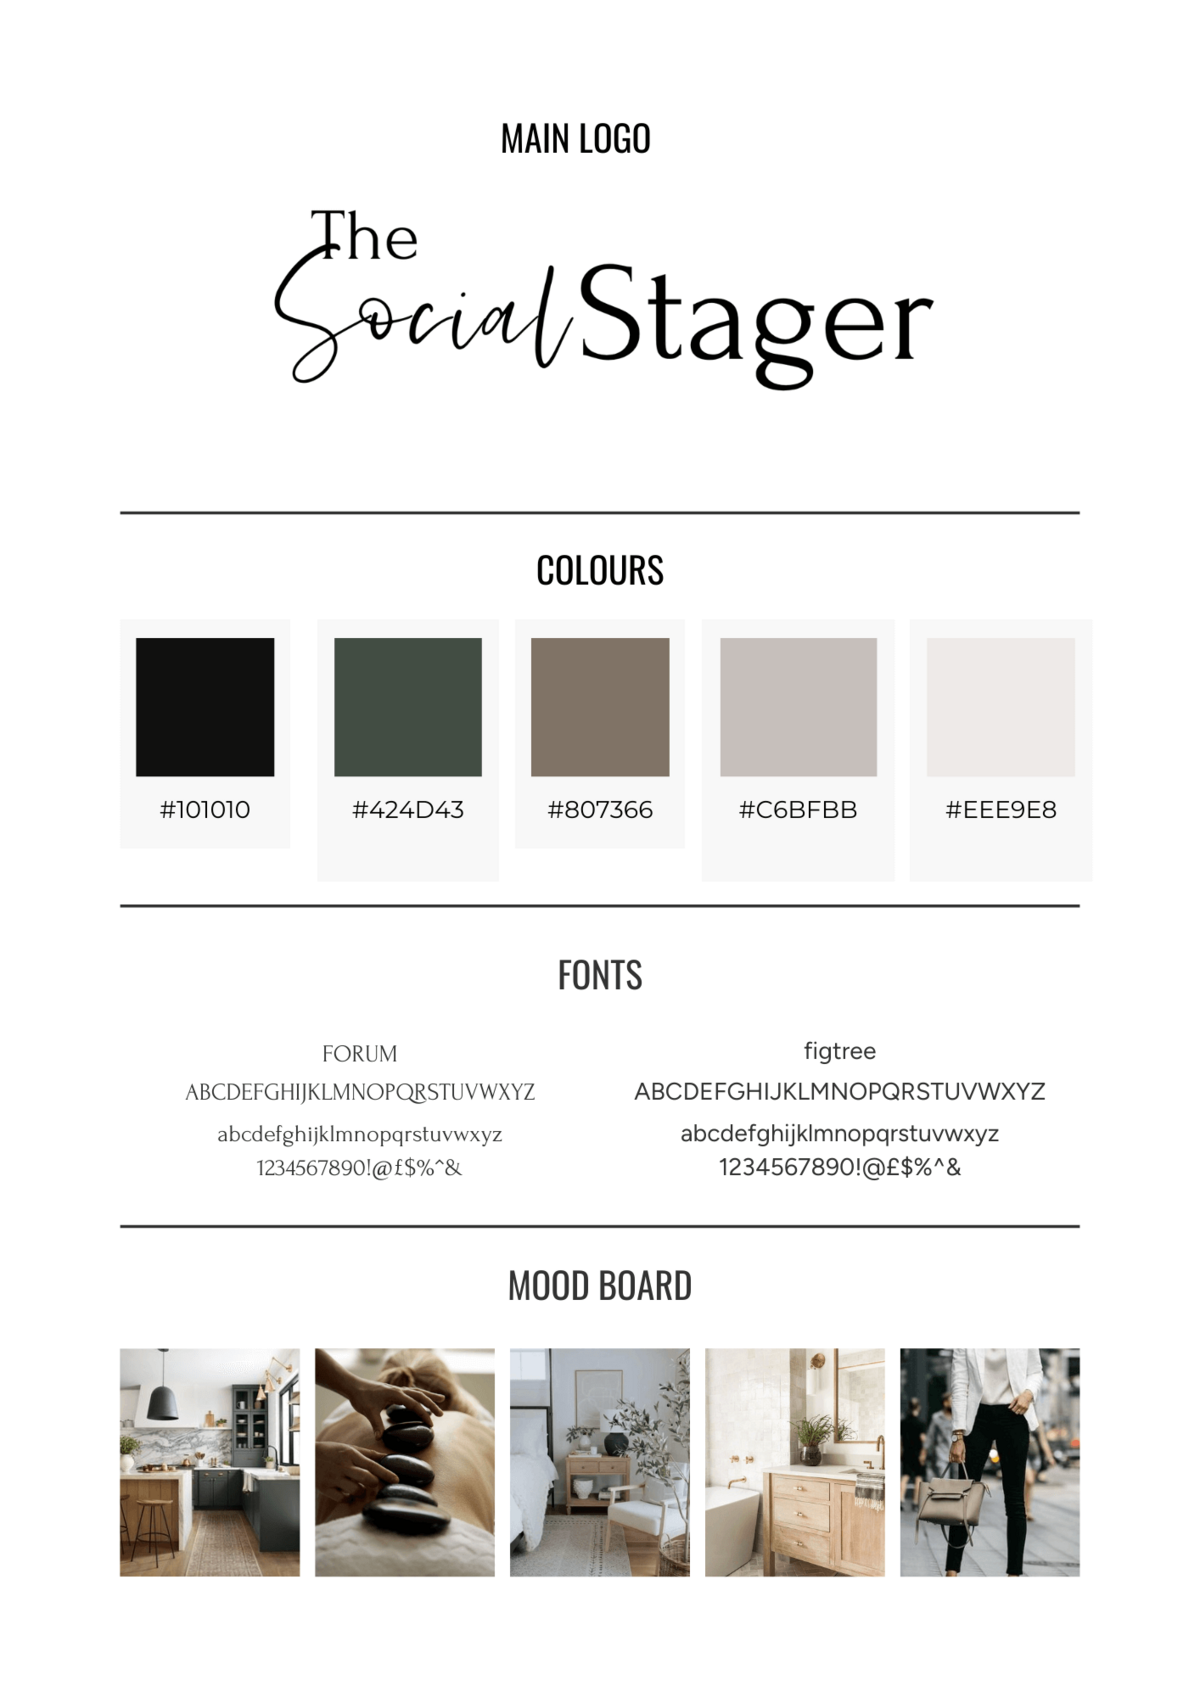 the social stager_brand development (1)